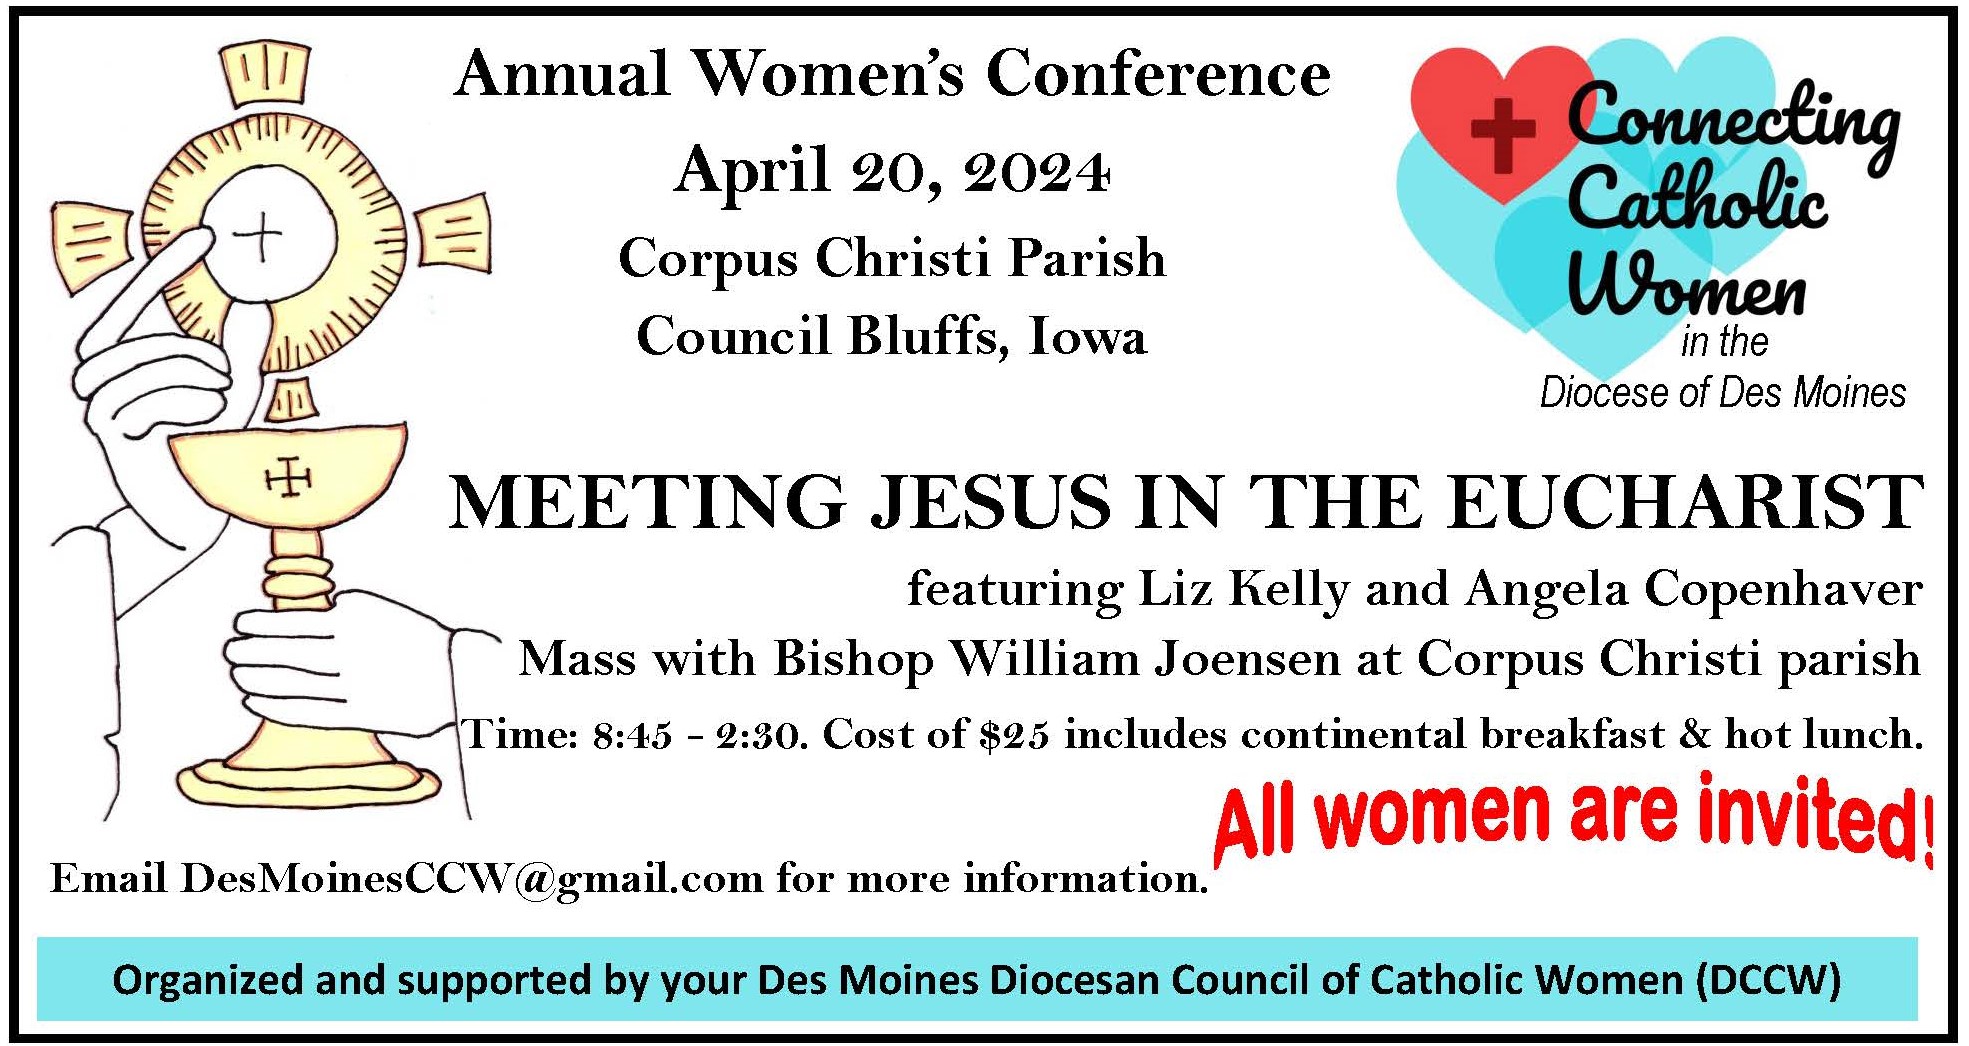 Annual Women's Conference